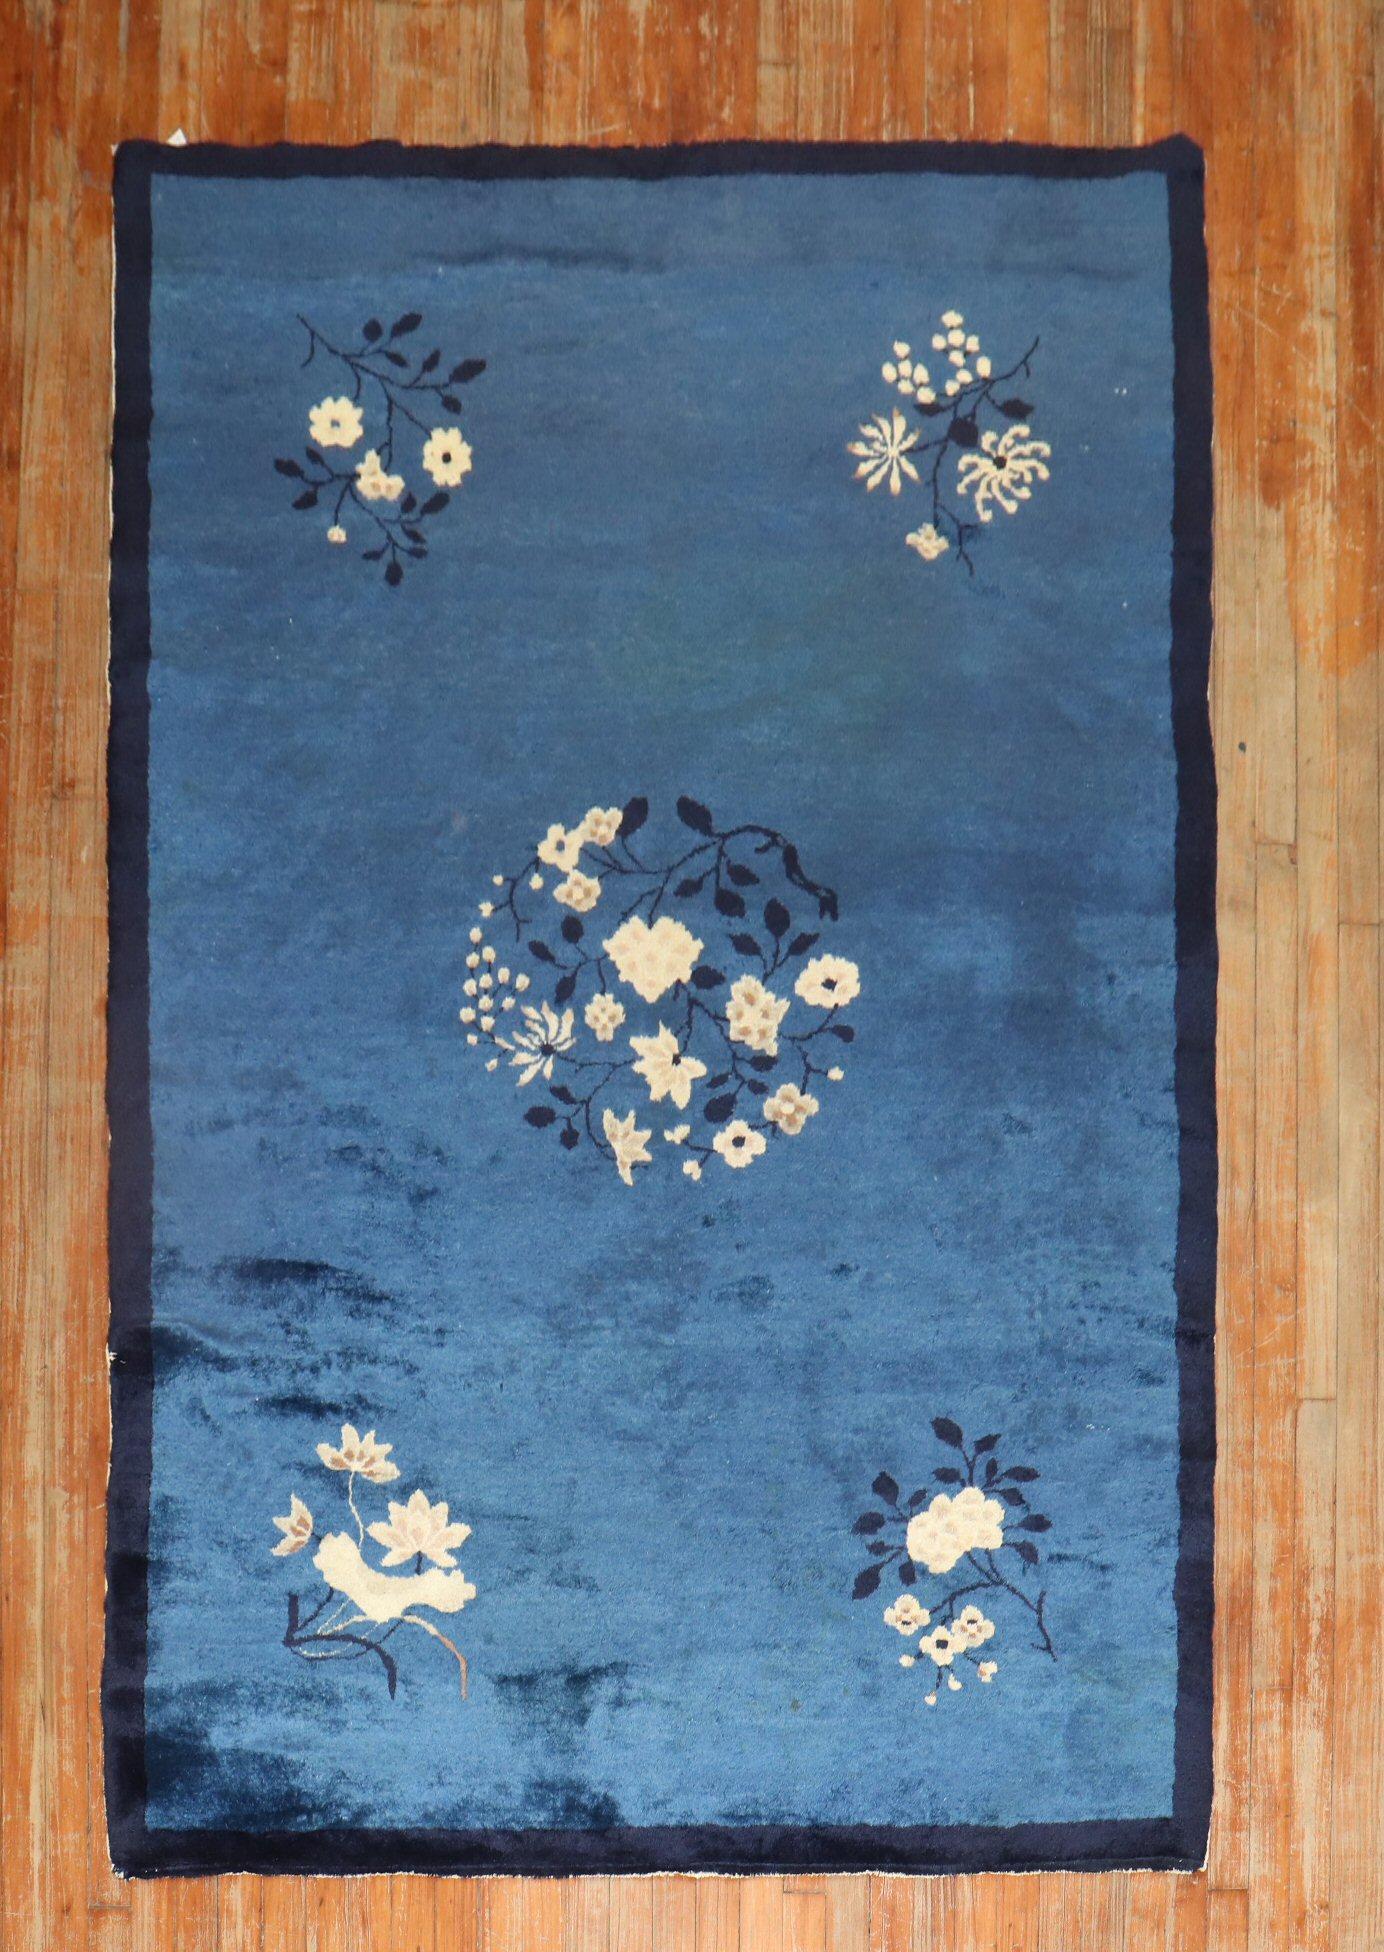 Mid 20th century Chinese Floral design rug in predominantly navy blue

Measures: 4'10'' x 7'8''.